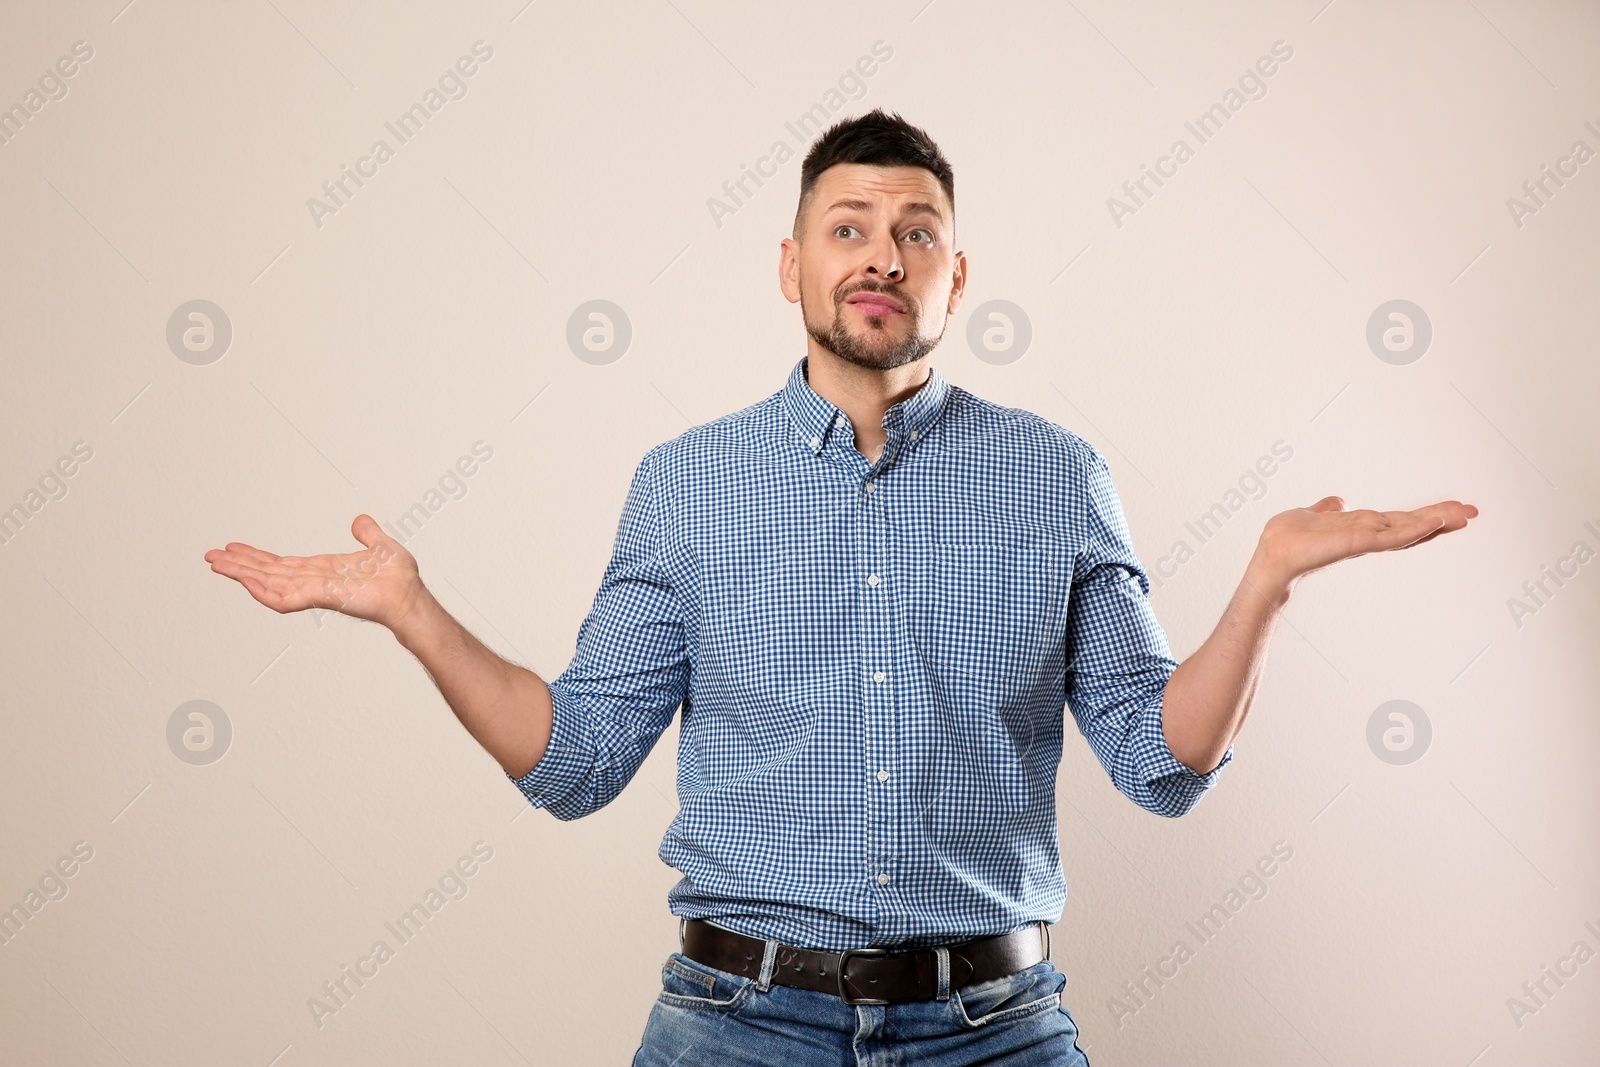 Photo of Emotional man in casual outfit on grey background